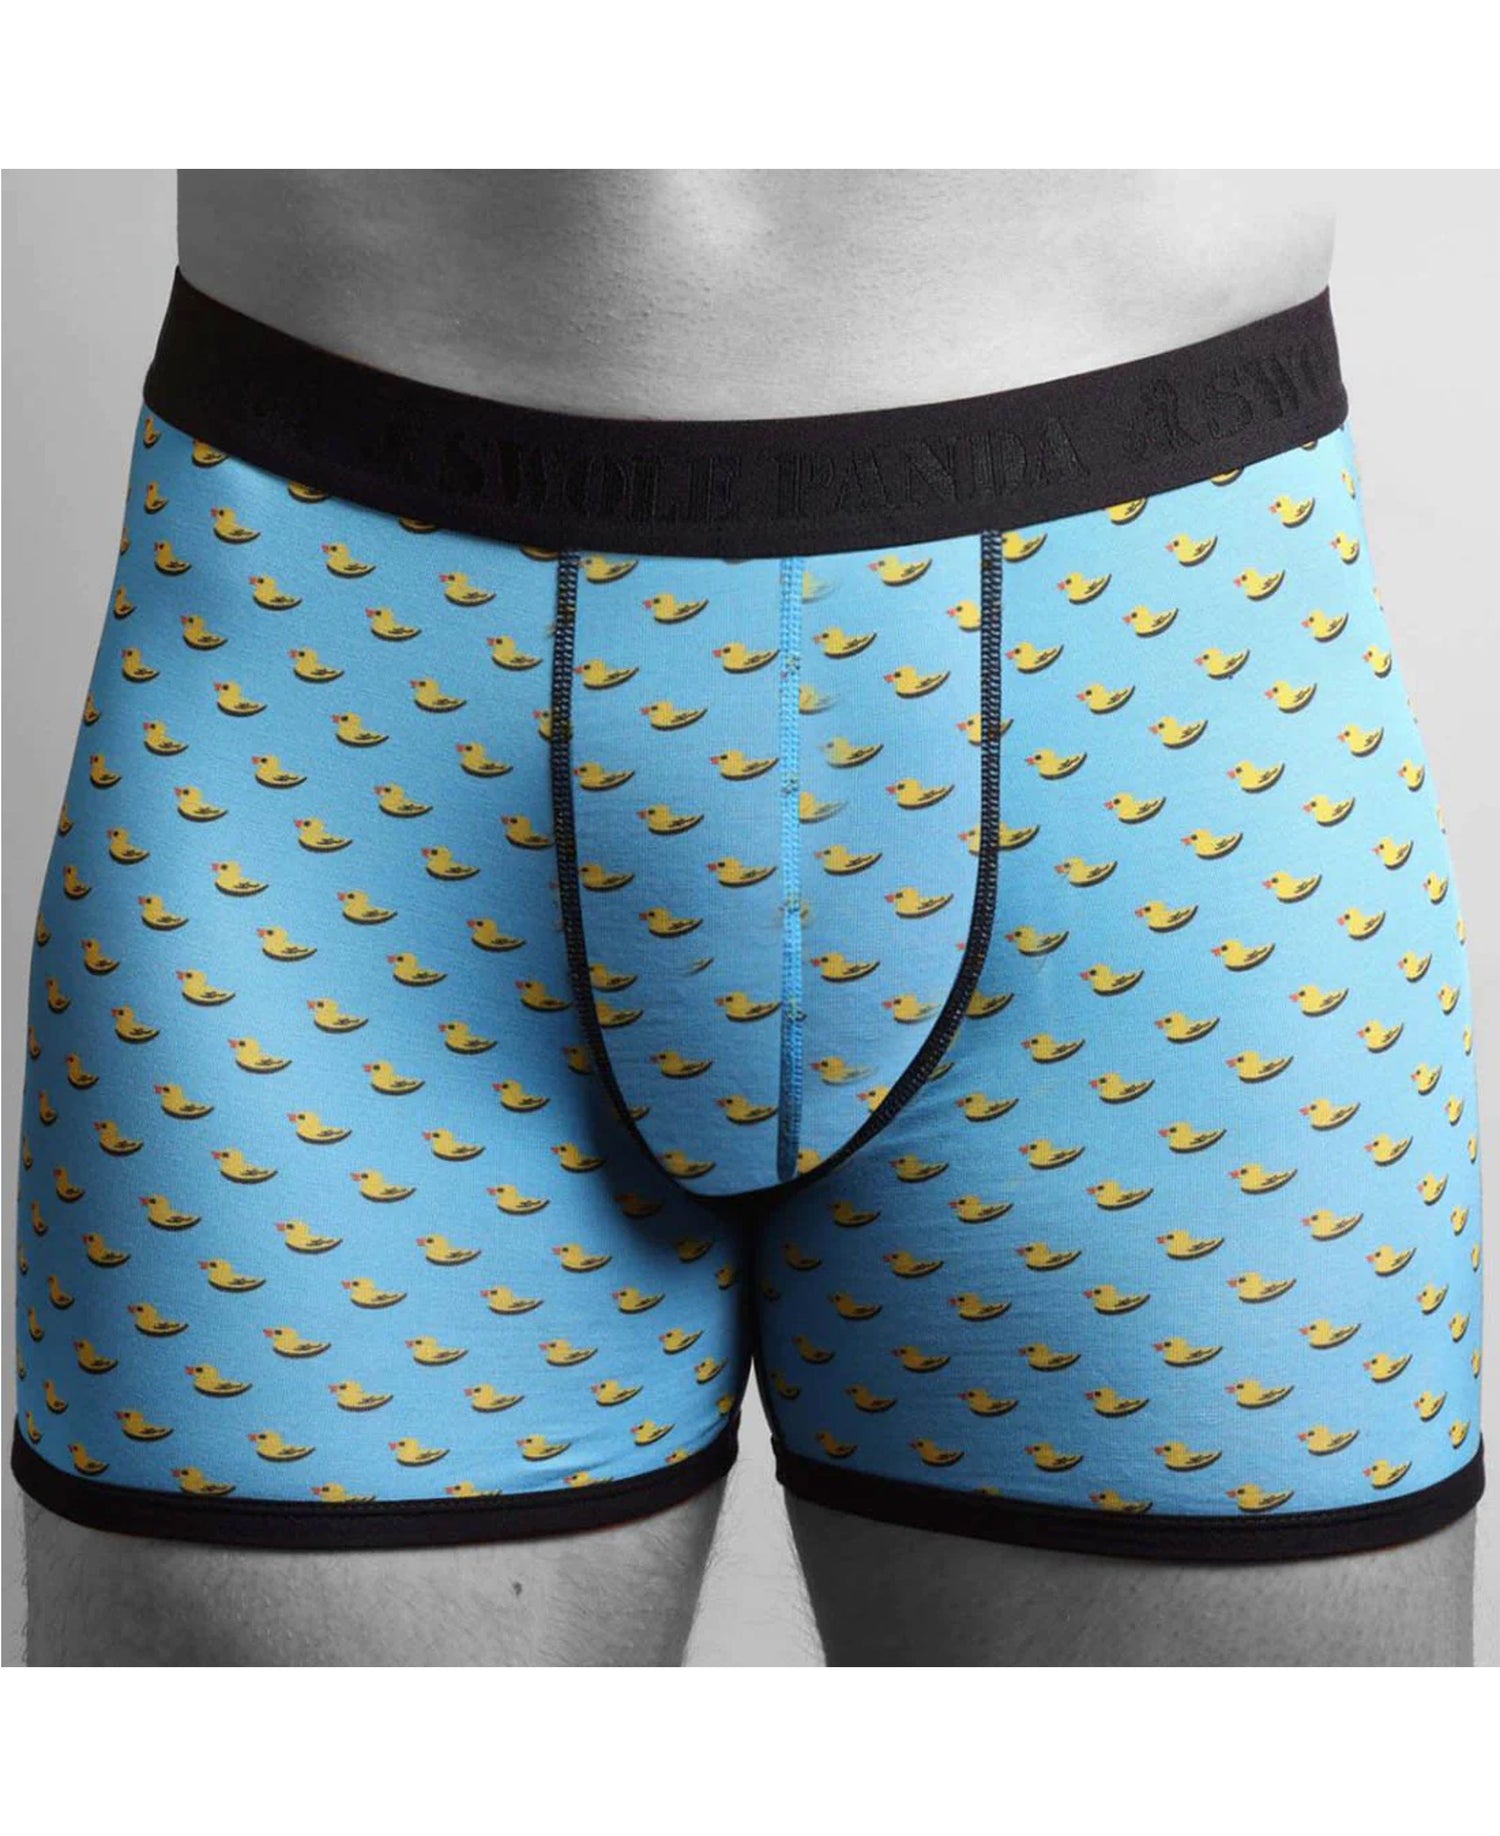 Bamboo Boxers - Duck/Black Band